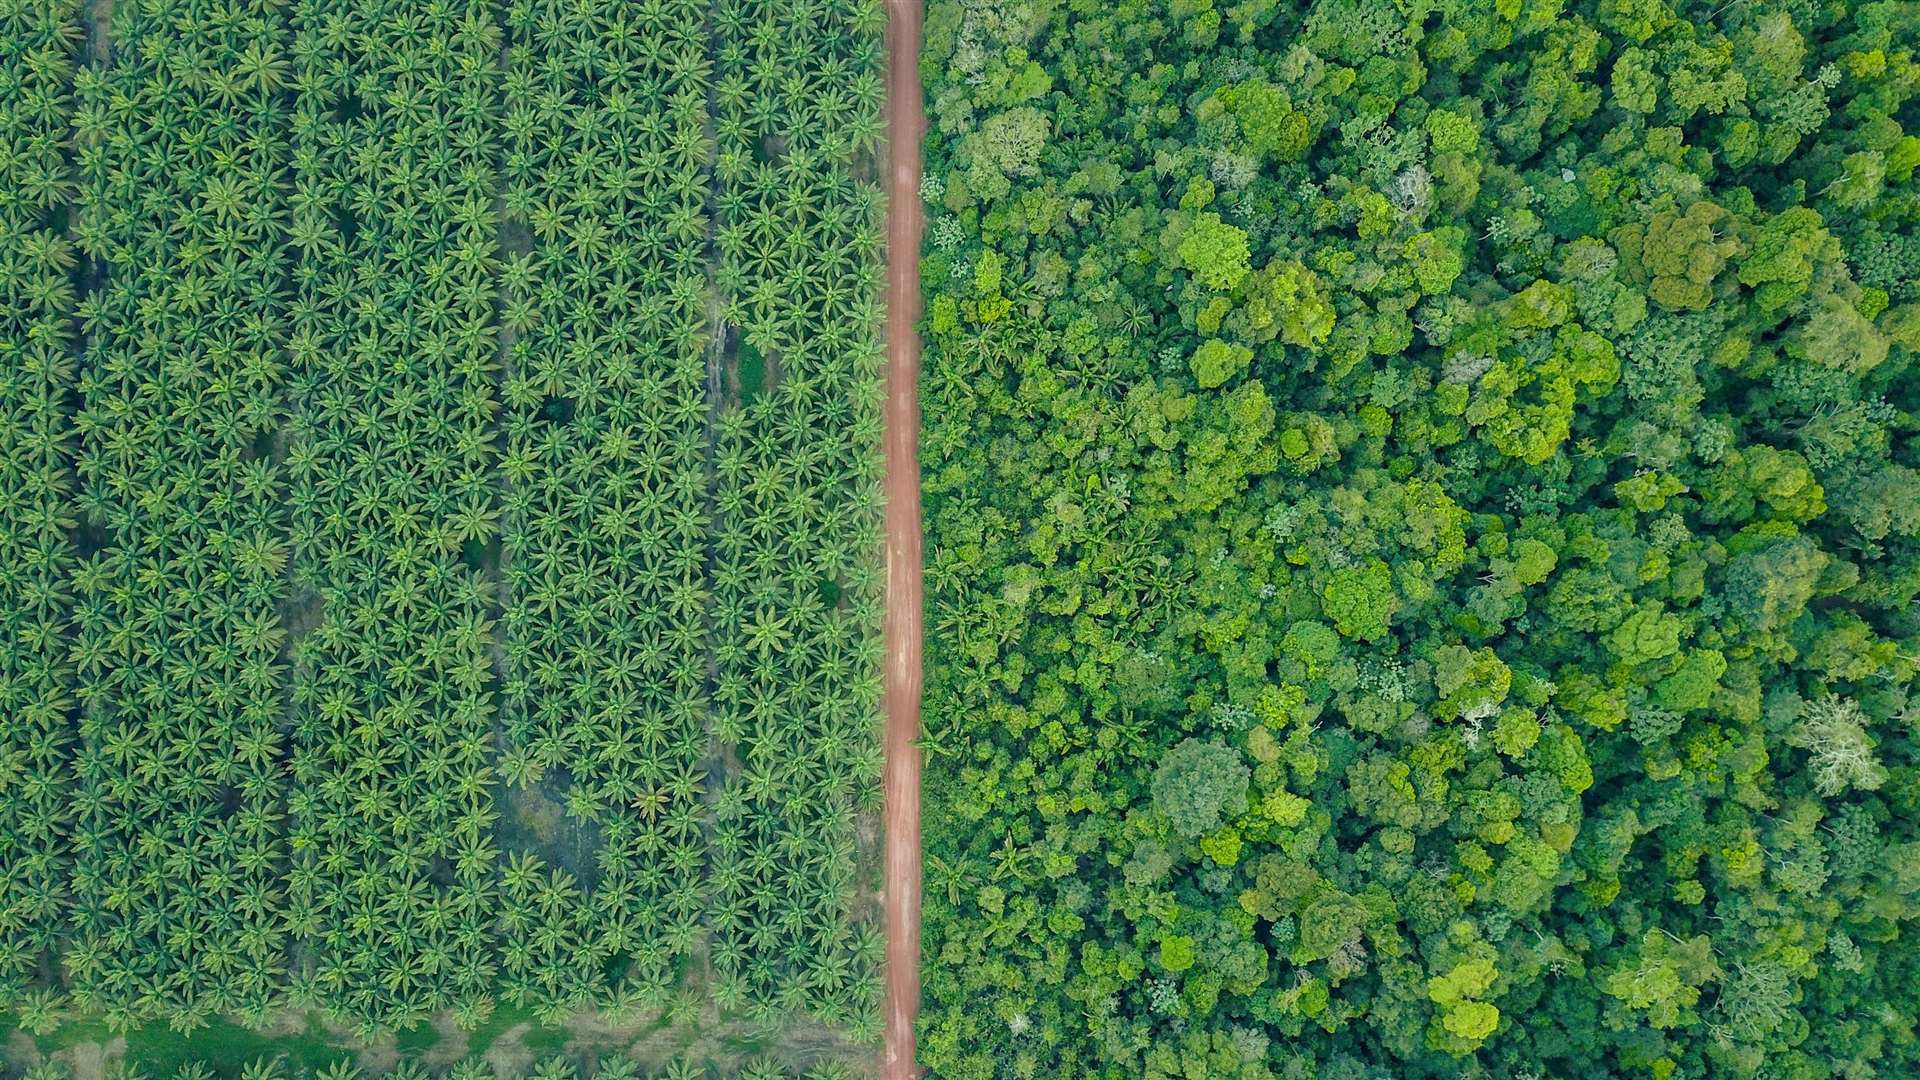 The Amazon is under threat from large-scale agriculture, including palm oil plantations. Picture: PA Photo/Laurie Hedges